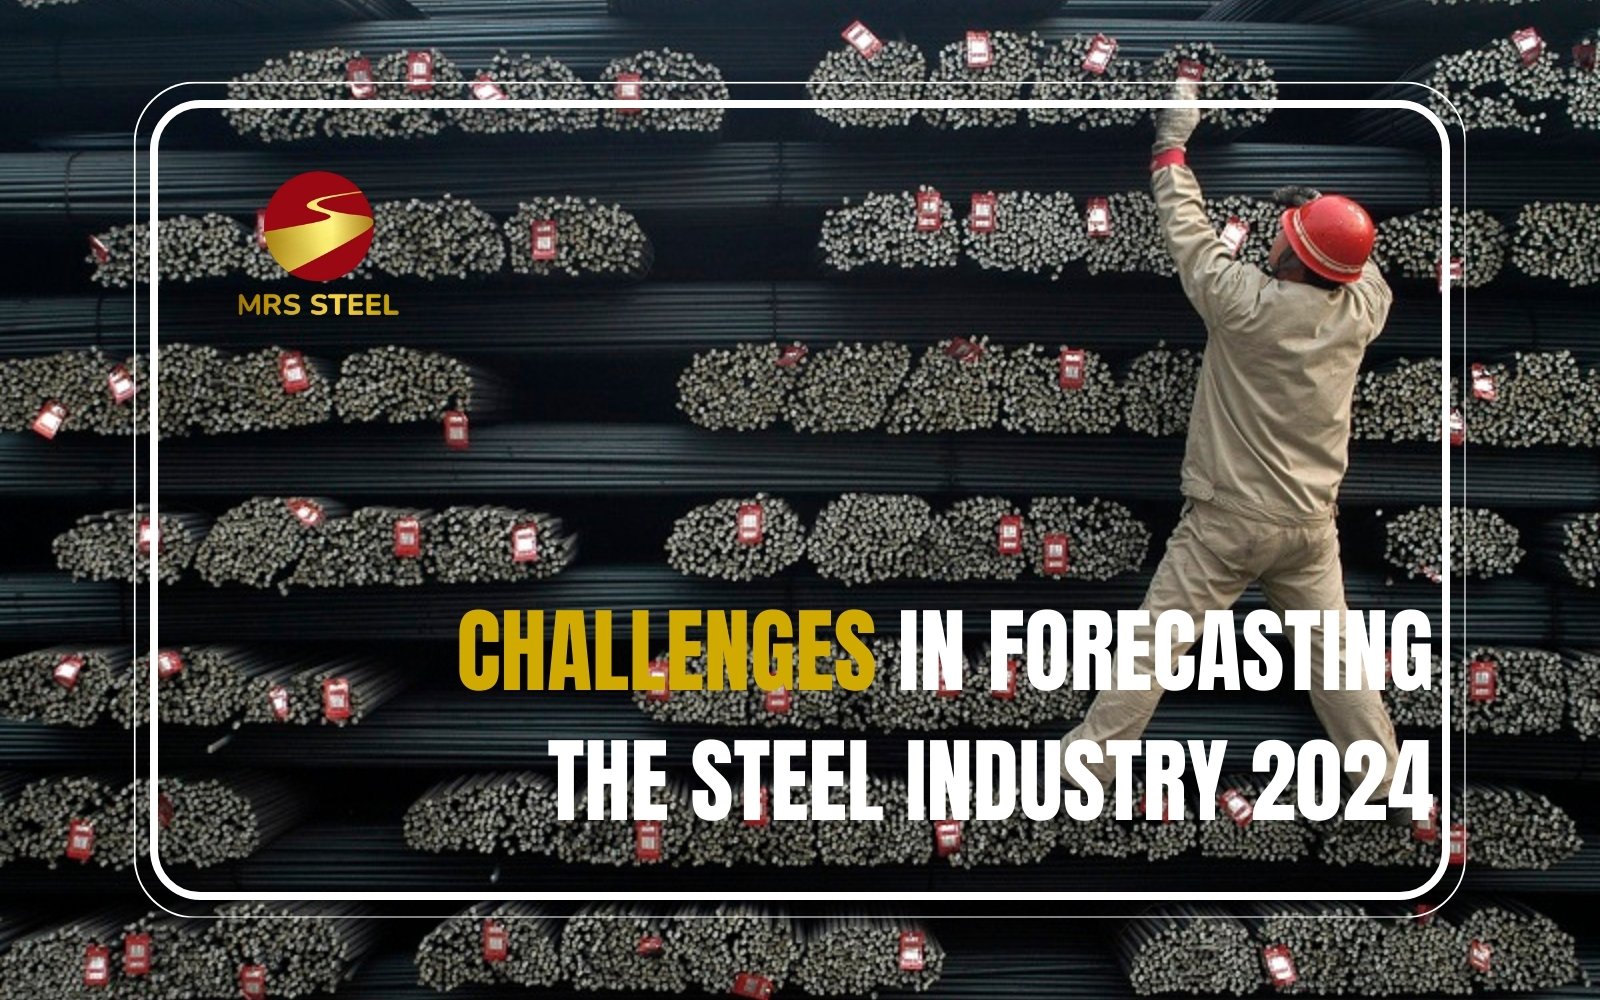 Top 7 challenges in forecasting the steel industry's prospects in 2024